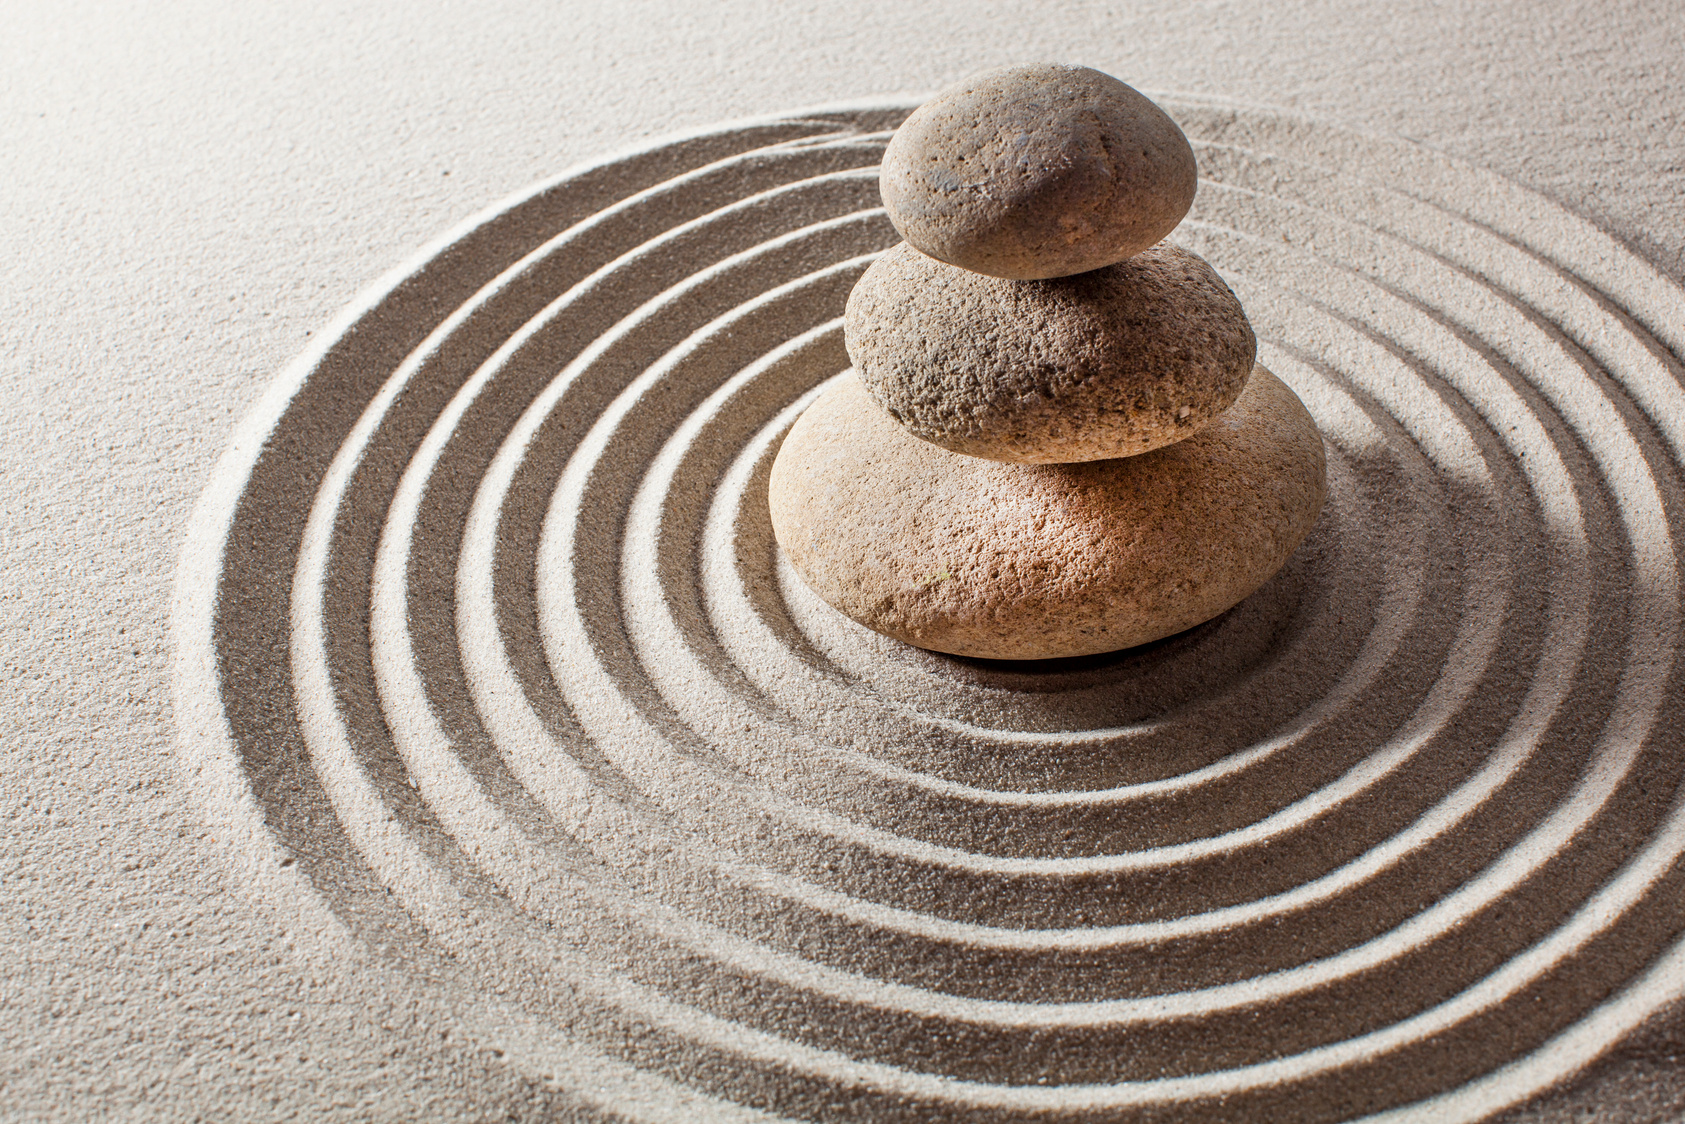 mineral tranquility with balancing pebbles